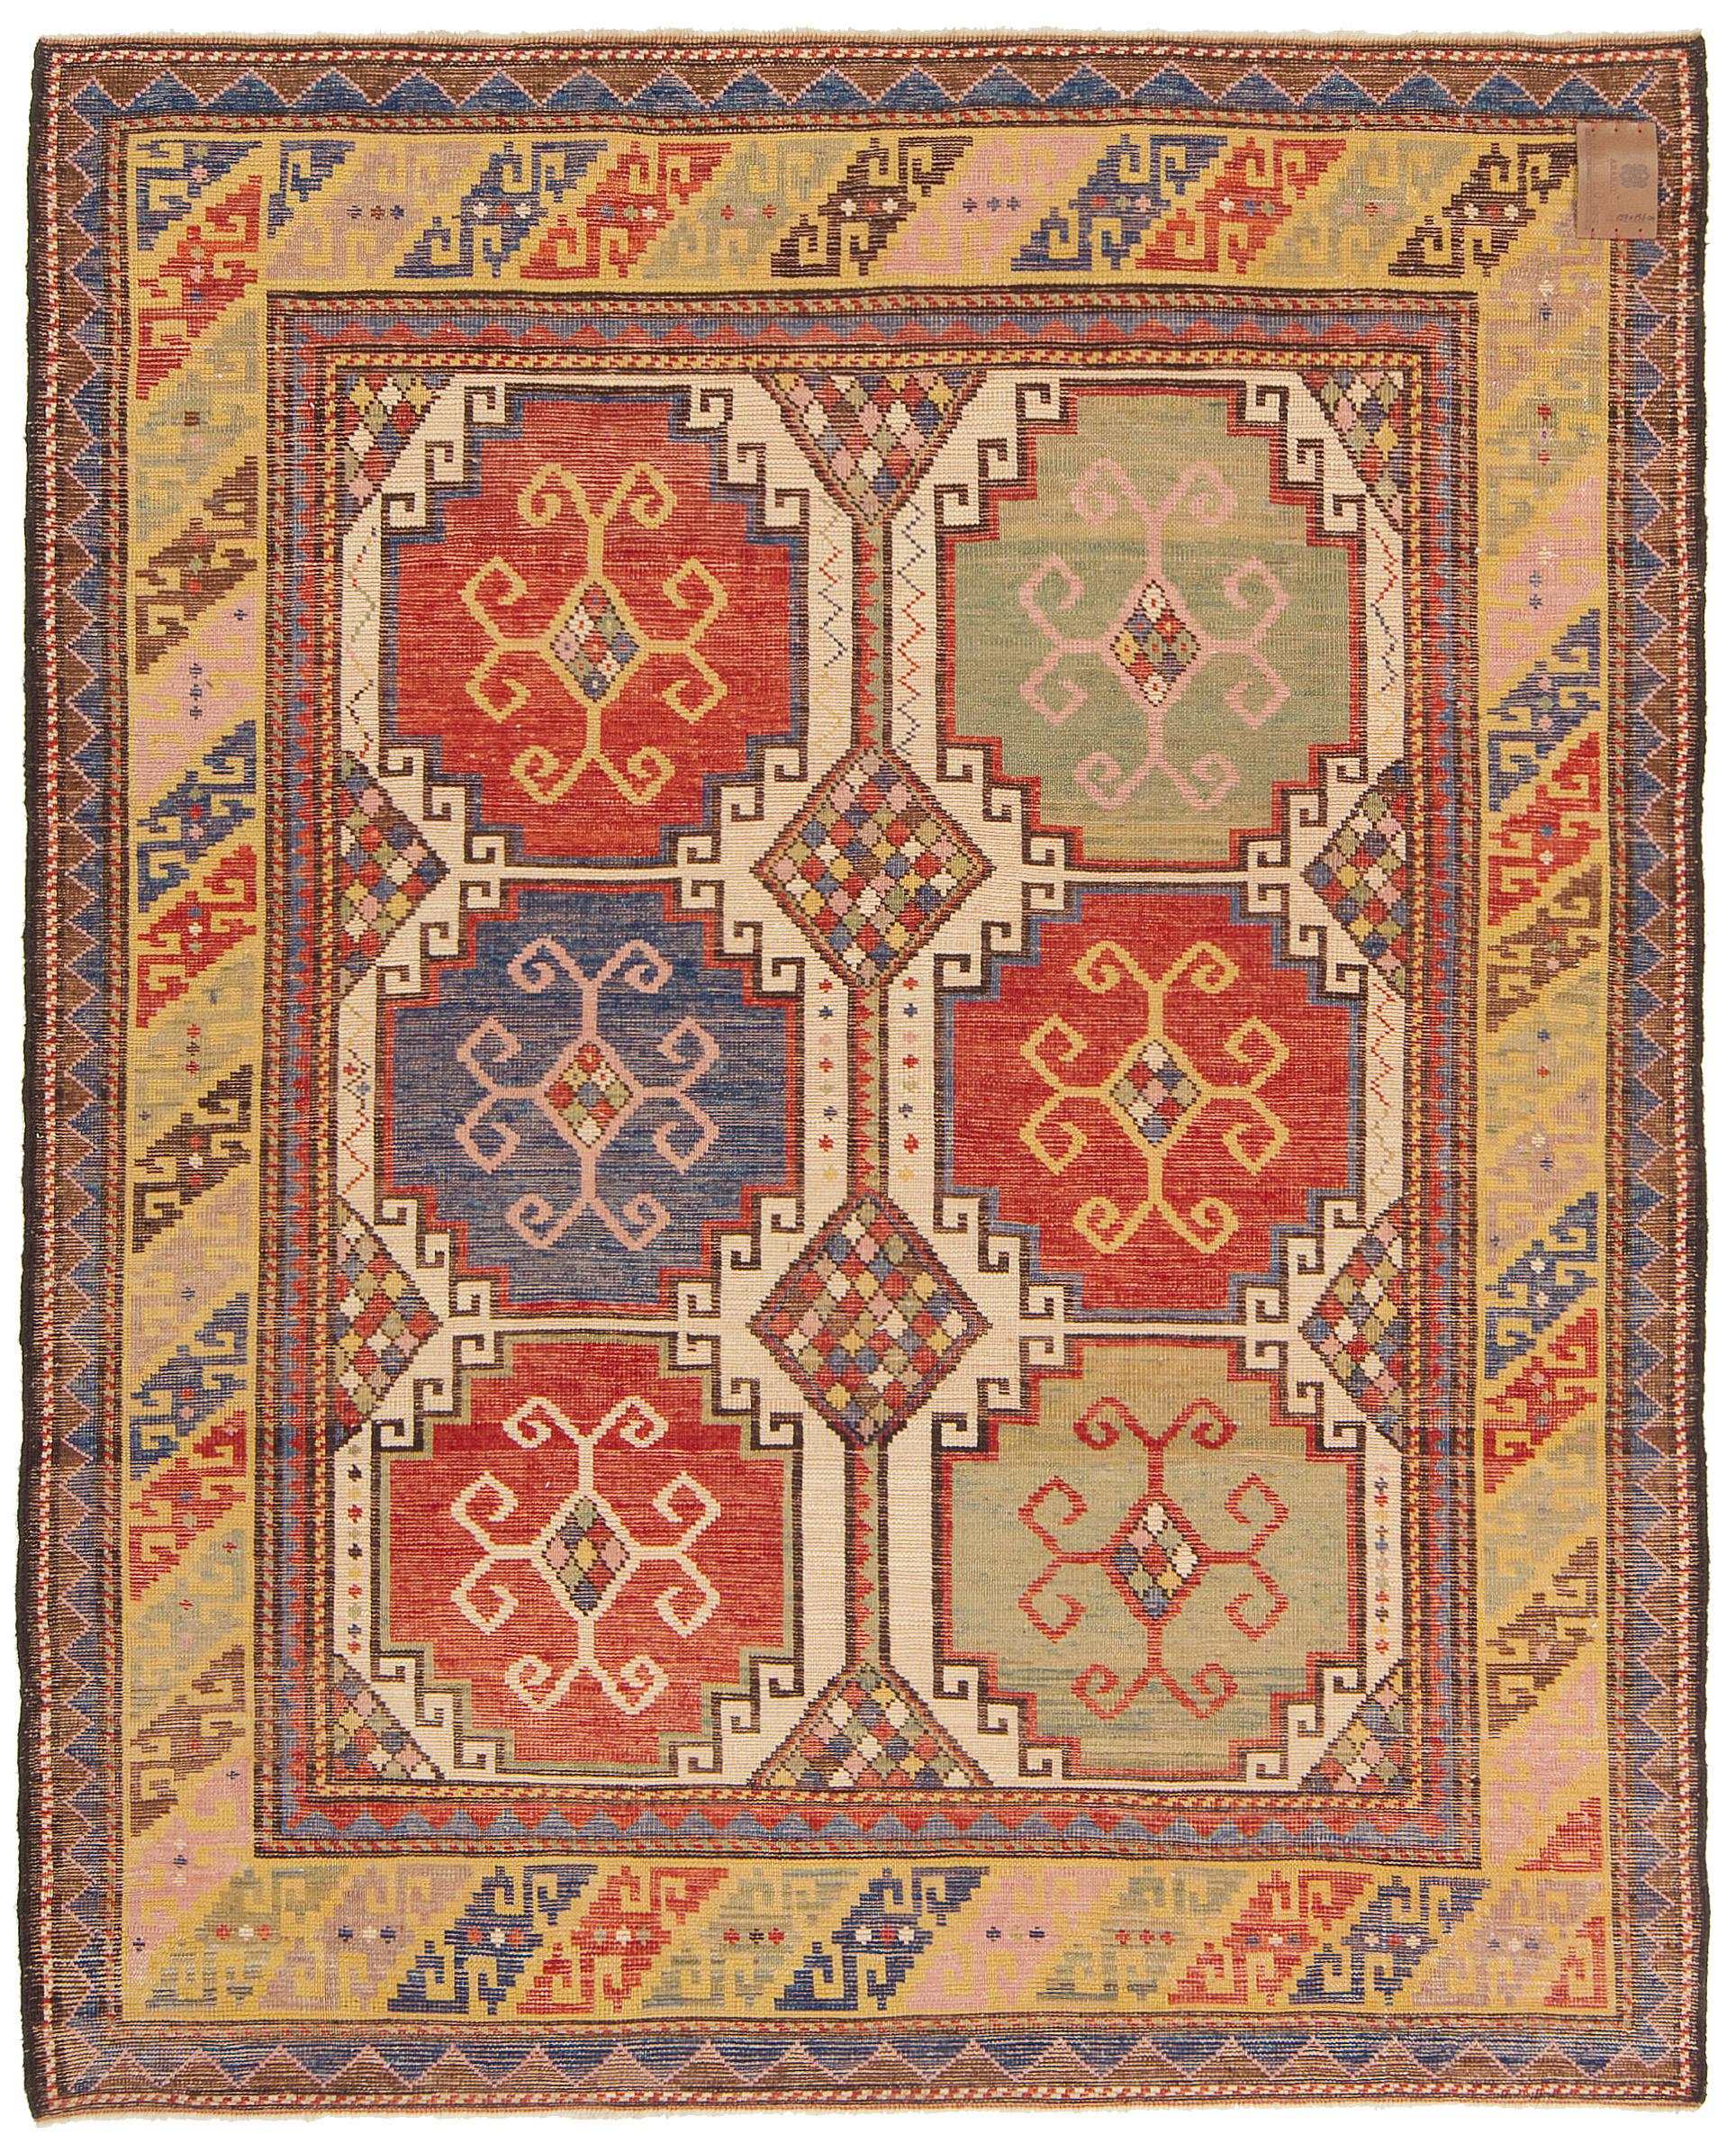 The source of the rug comes from the book Tapis du Caucase – Rugs of the Caucasus, Ian Bennett & Aziz Bassoul, The Nicholas Sursock Museum, Beirut, Lebanon 2003, nr.24 and Oriental Rugs Volume 1 Caucasian, Ian Bennett, Oriental Textile Press,